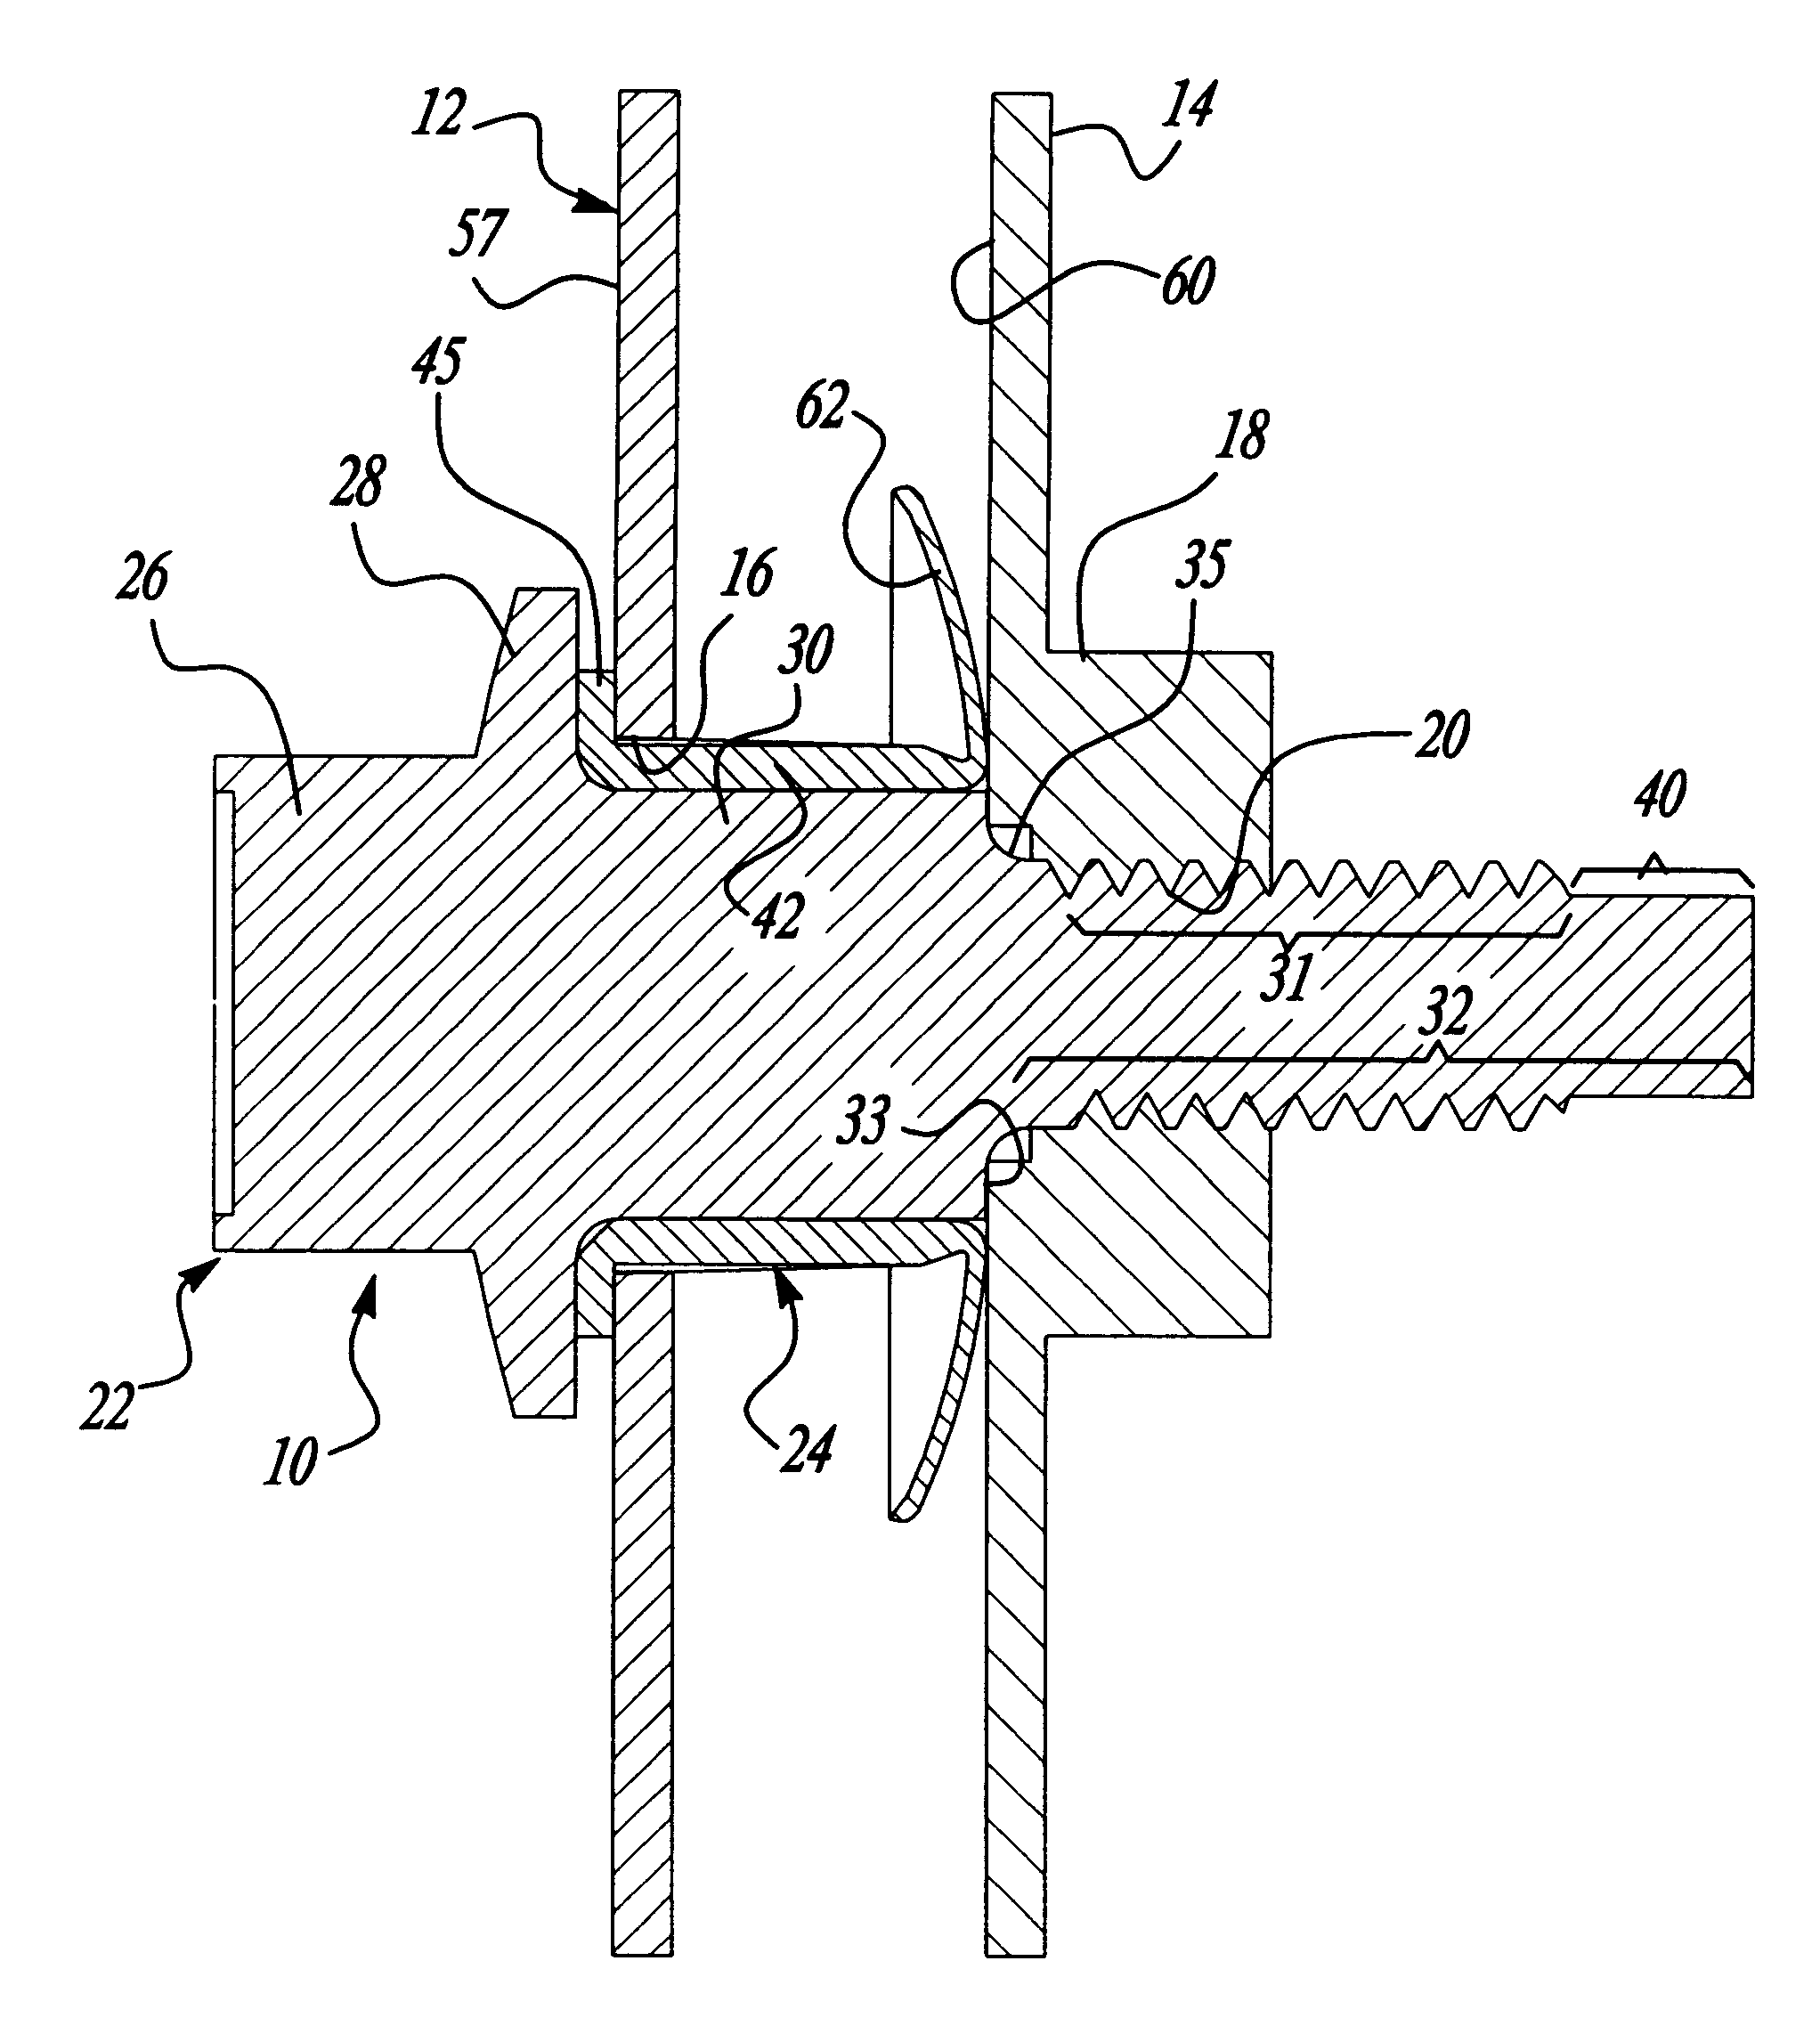 Pivot apparatus including a fastener and bushing assembly